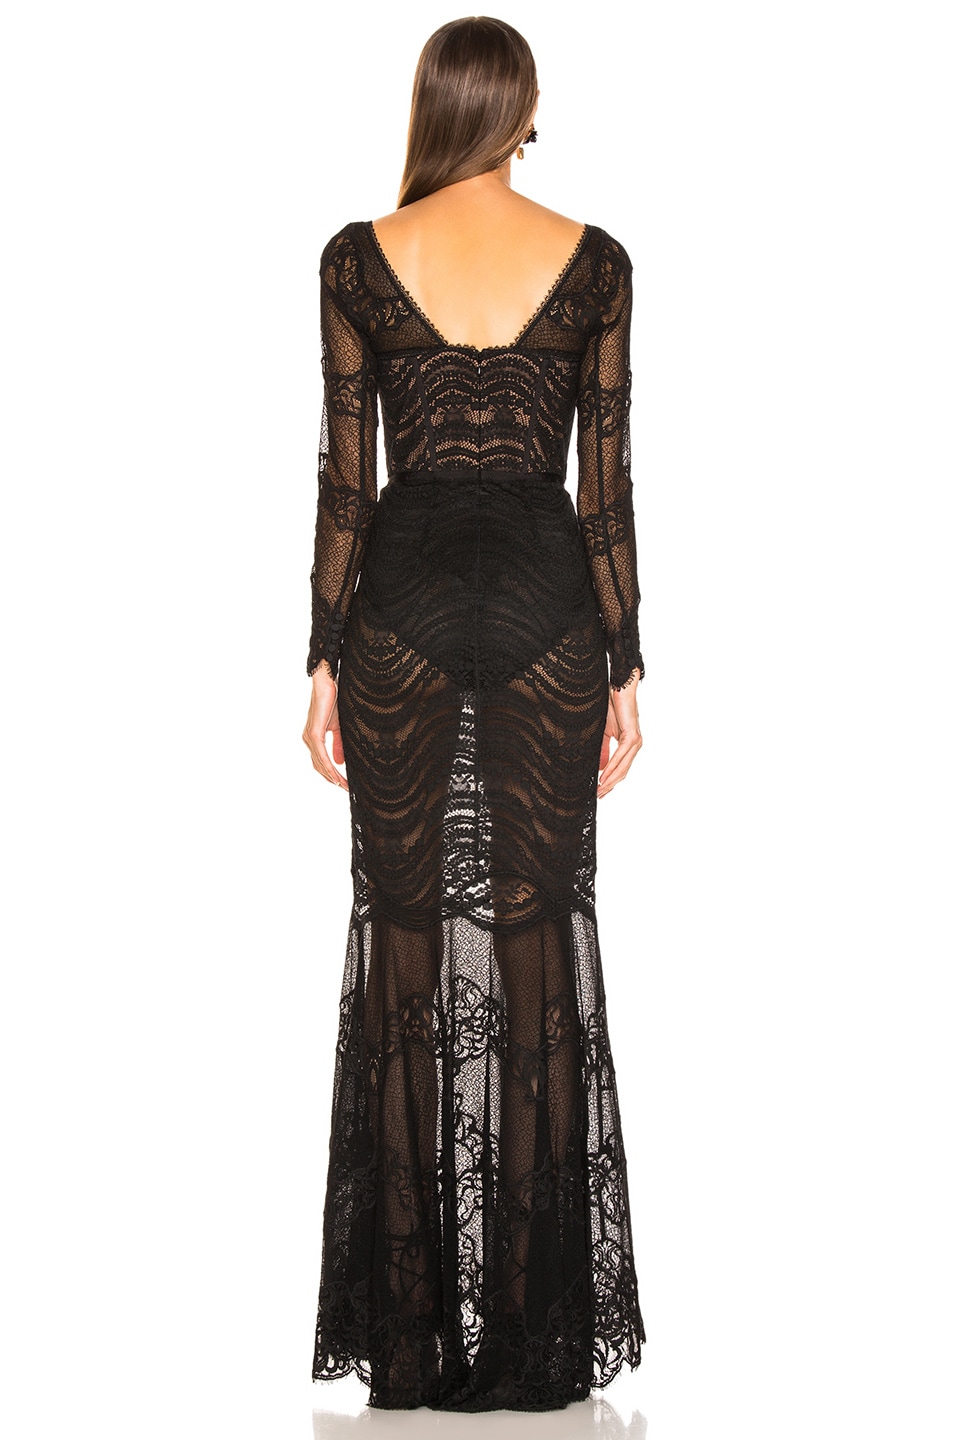 JONATHAN SIMKHAI Lace Bustier Gown in Black | FWRD